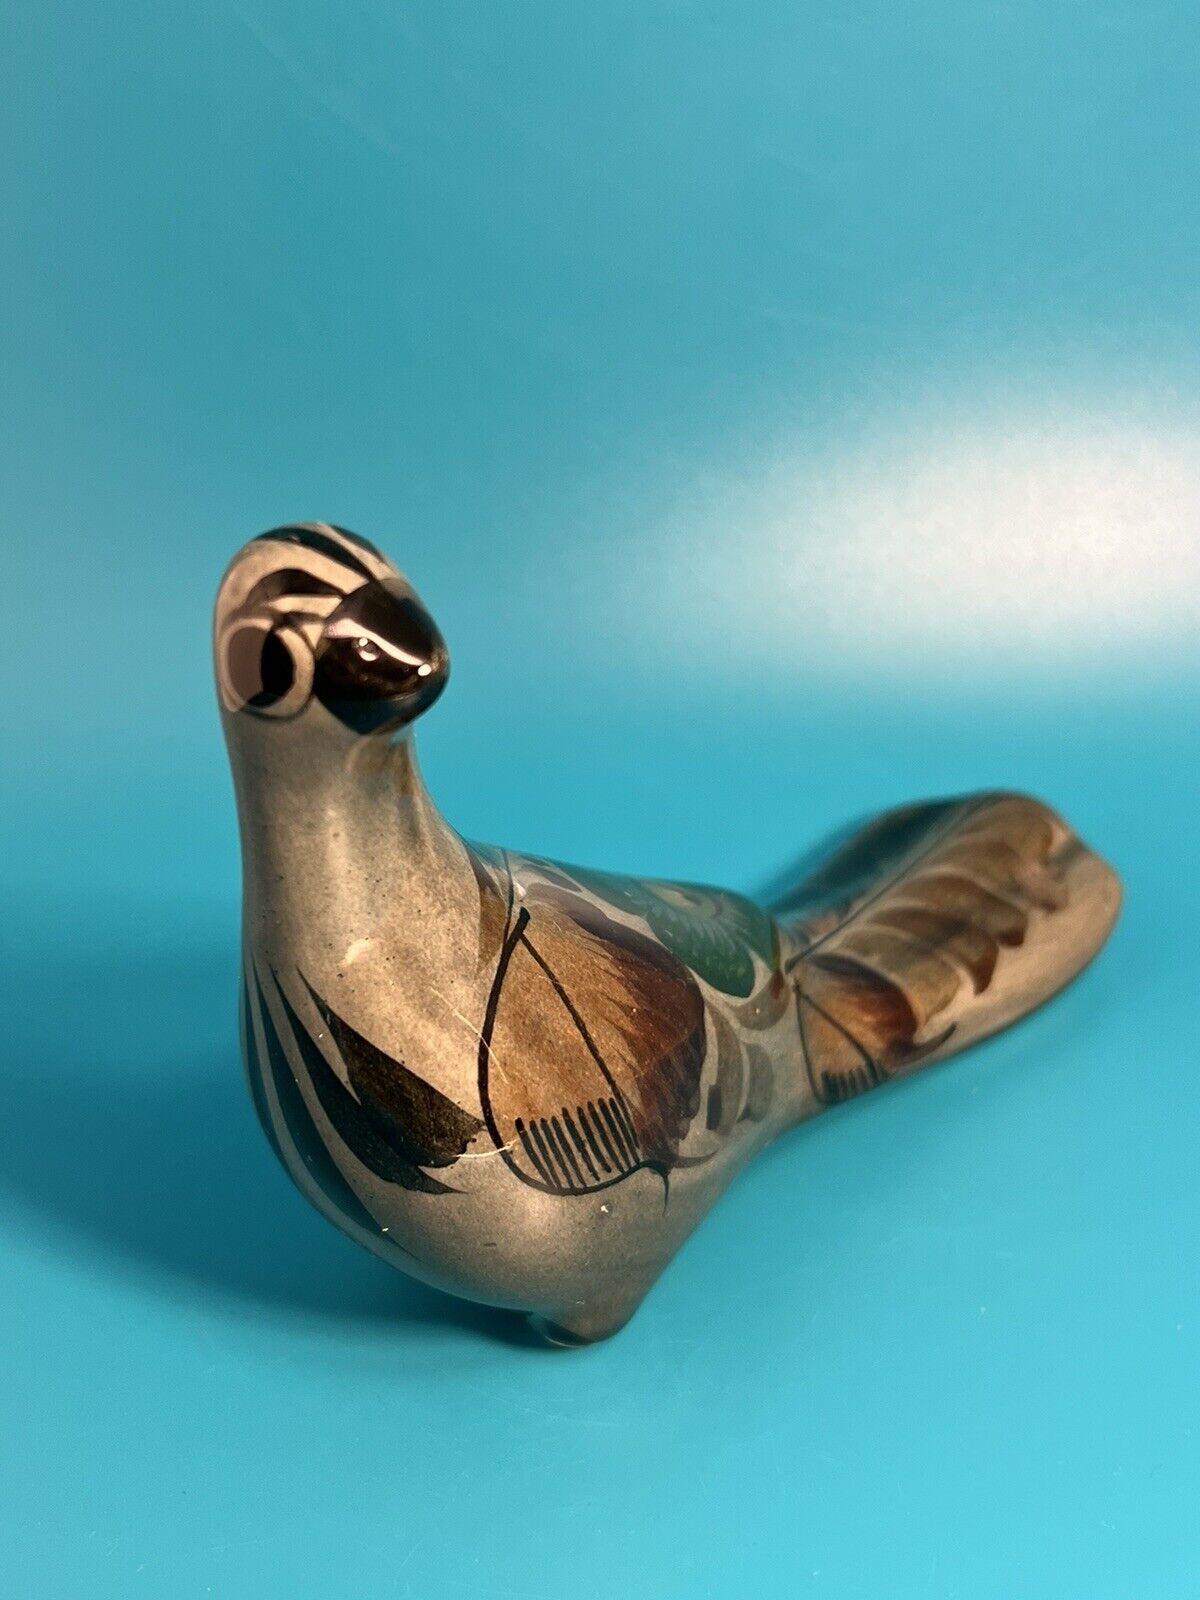 Vintage Tonala Mexican Pottery Bird Figurine, About 4” Tall